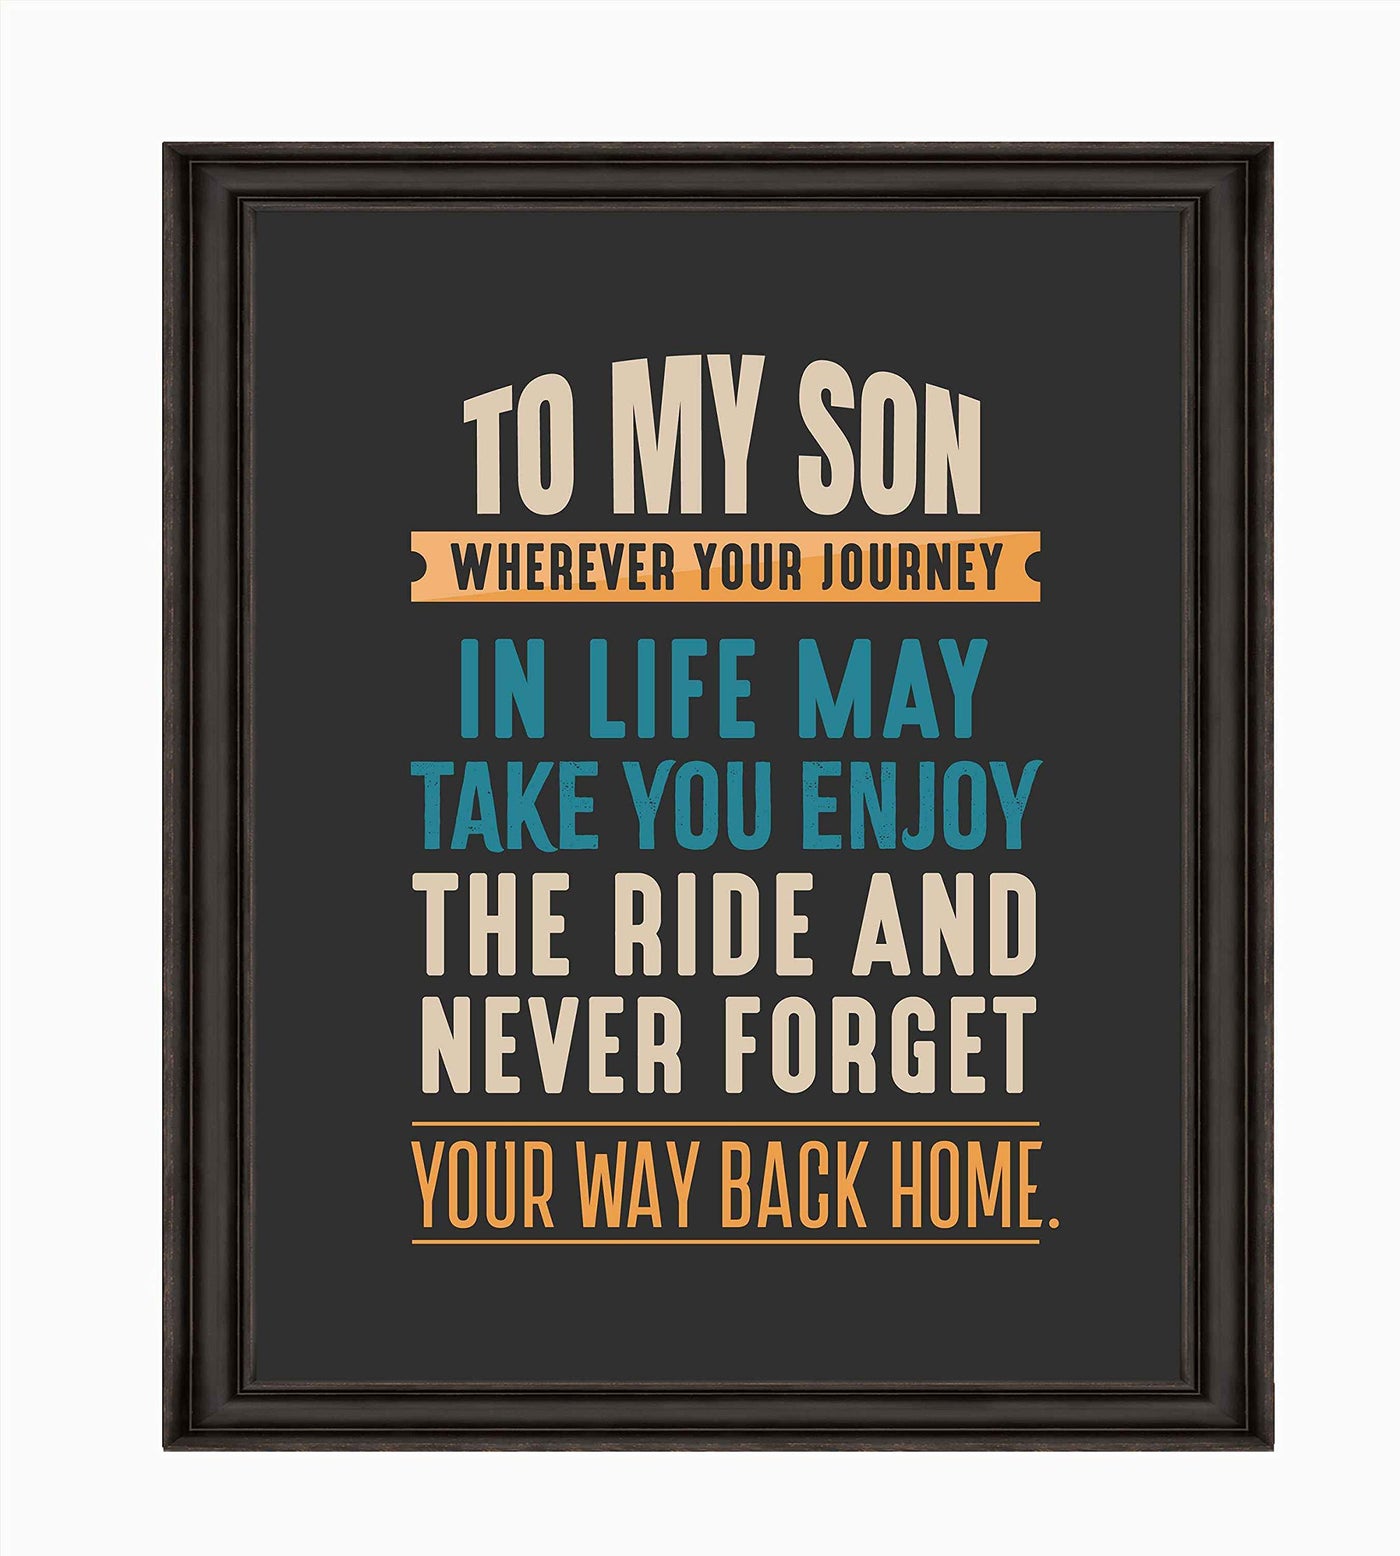 To My Son-Never Forget Your Way Back Home Inspirational Wall Art Sign -8 x 10" Typographic Poster Print-Ready to Frame. Lifetime Keepsake for Any Son On Any Occasion. Great Graduation Gift!